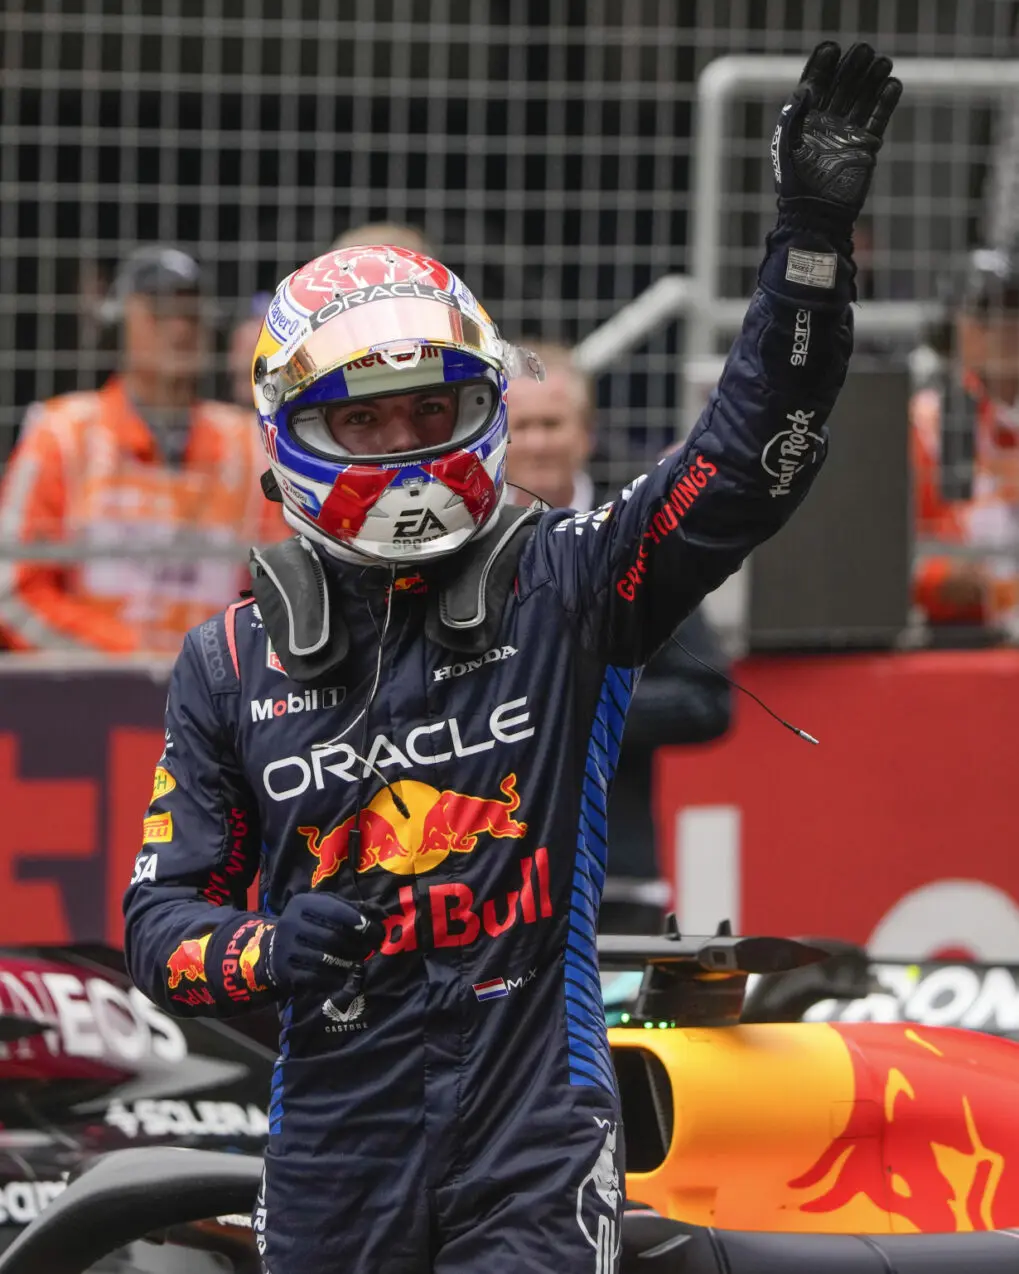 LA Post: Verstappen wins again. This time he takes first Formula 1 sprint race of the season